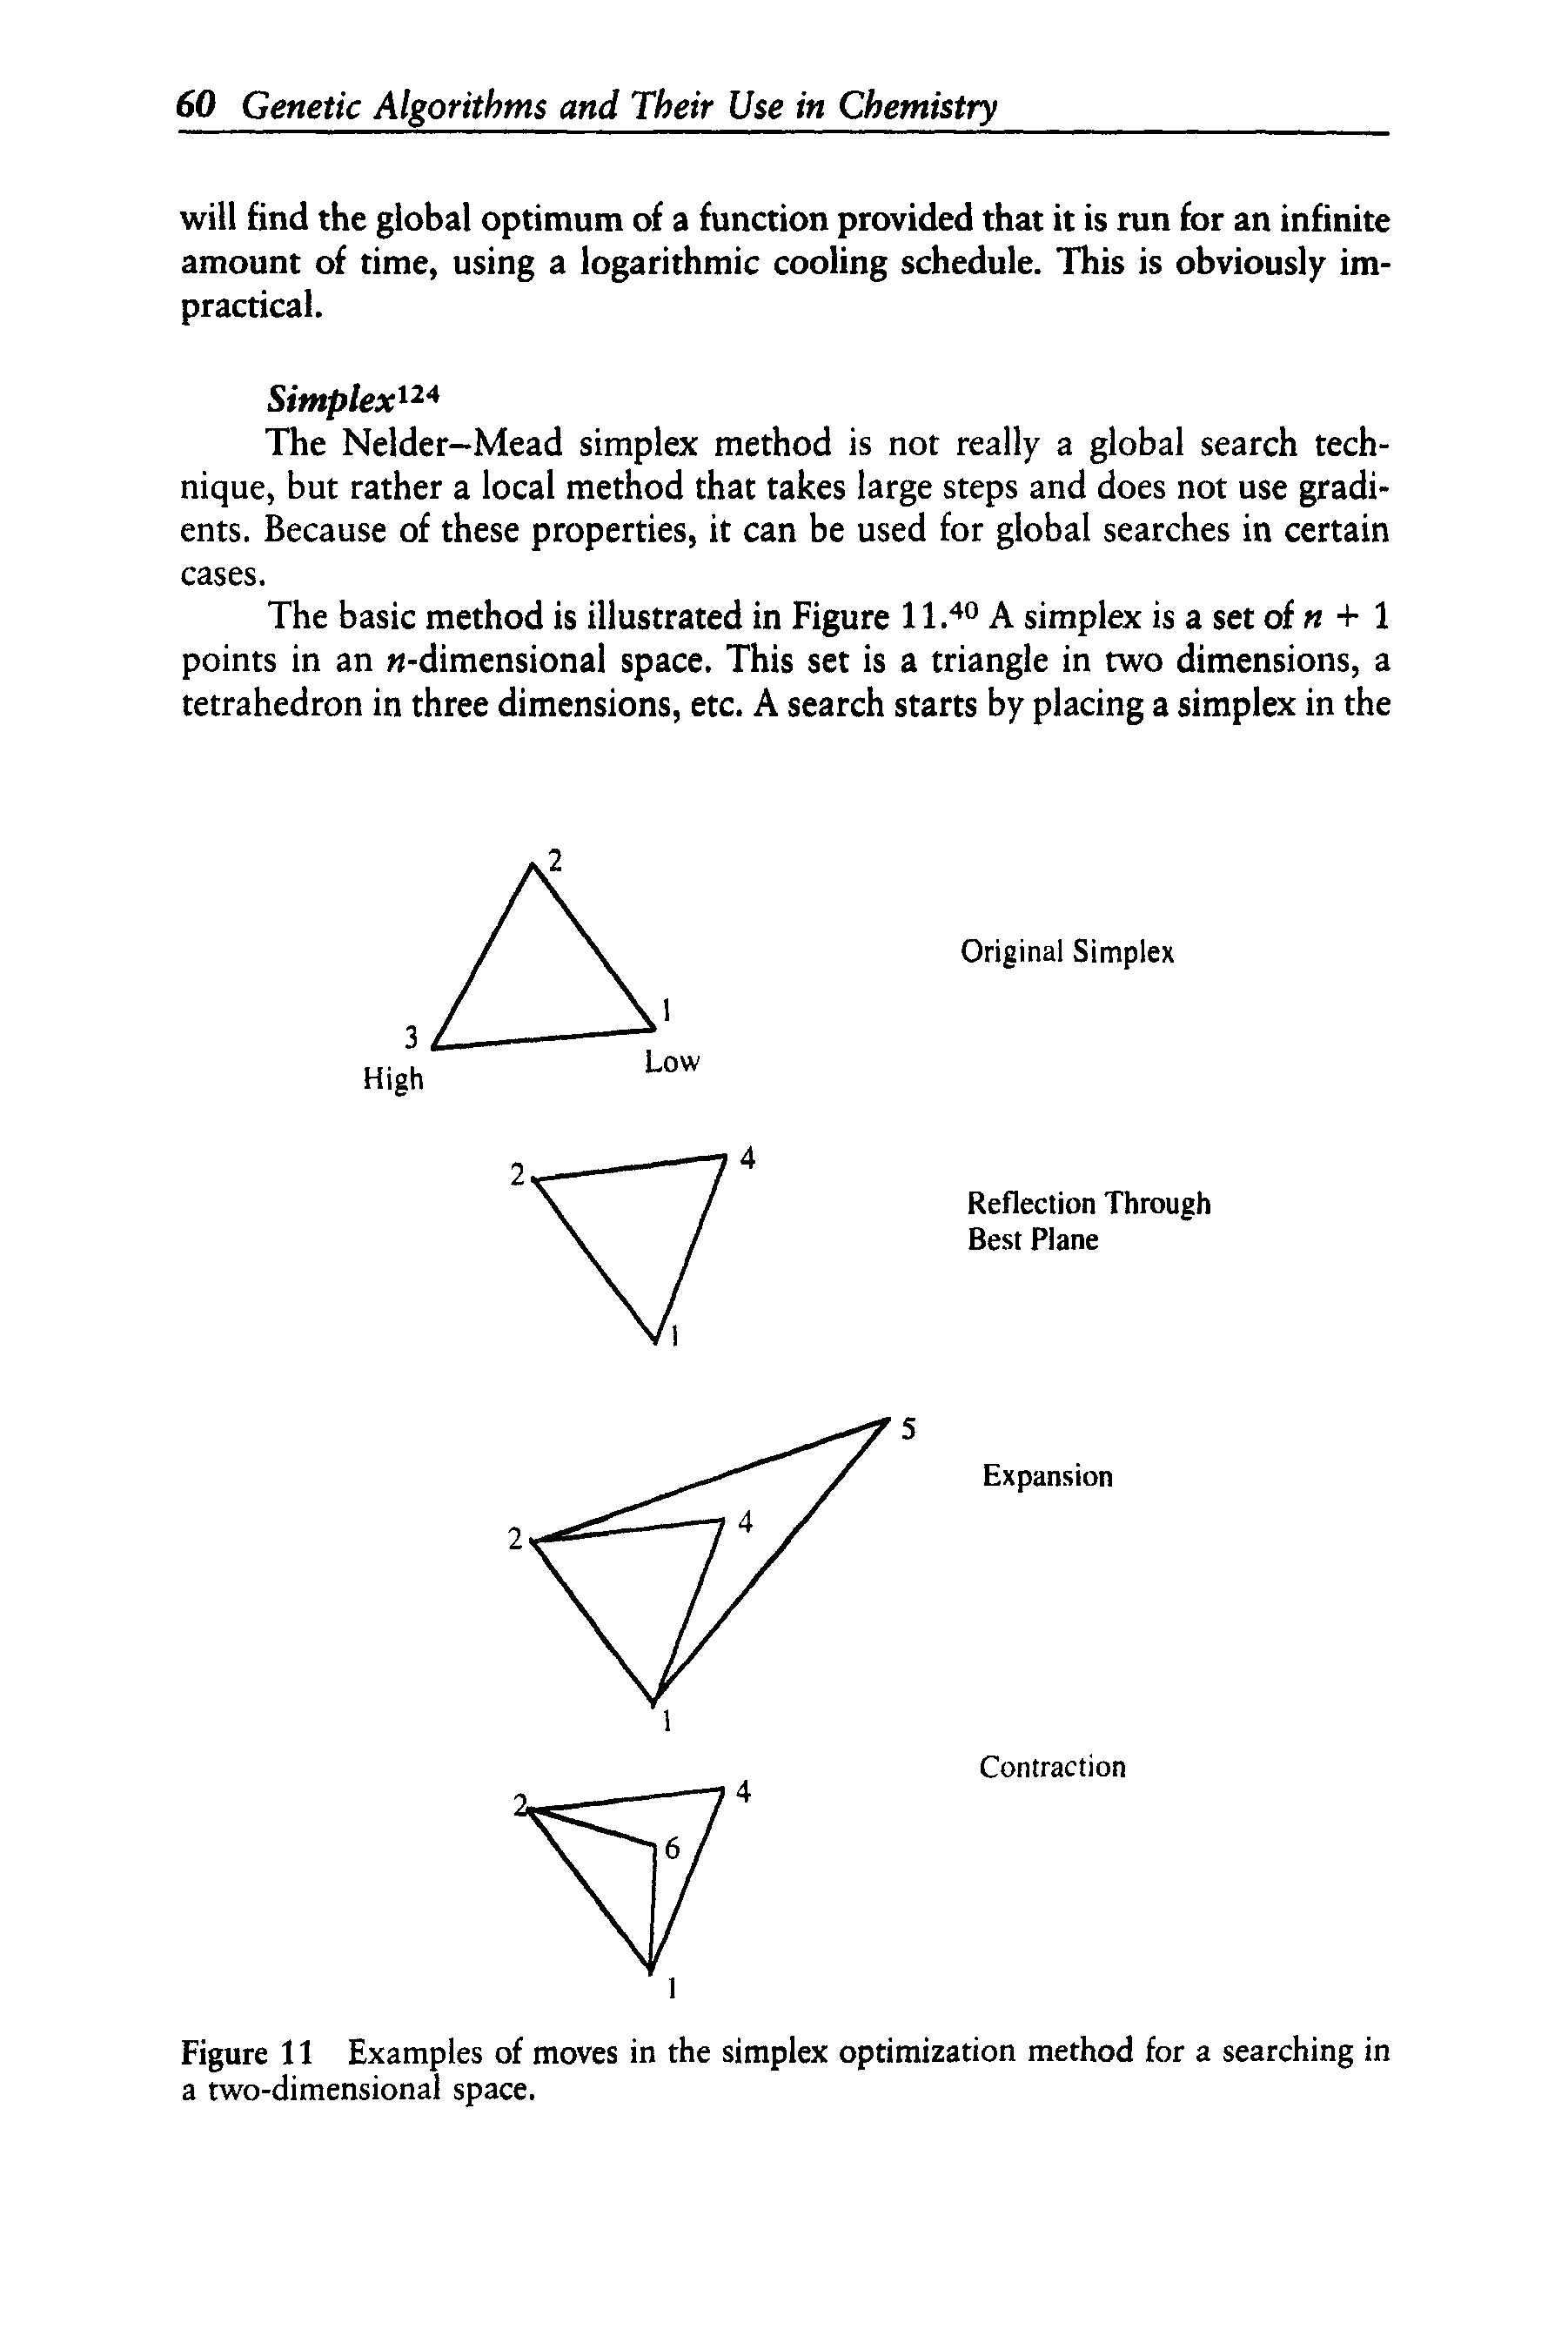 Figure 11 Examples of moves in the simplex optimization method for a searching in a two-dimensional space.